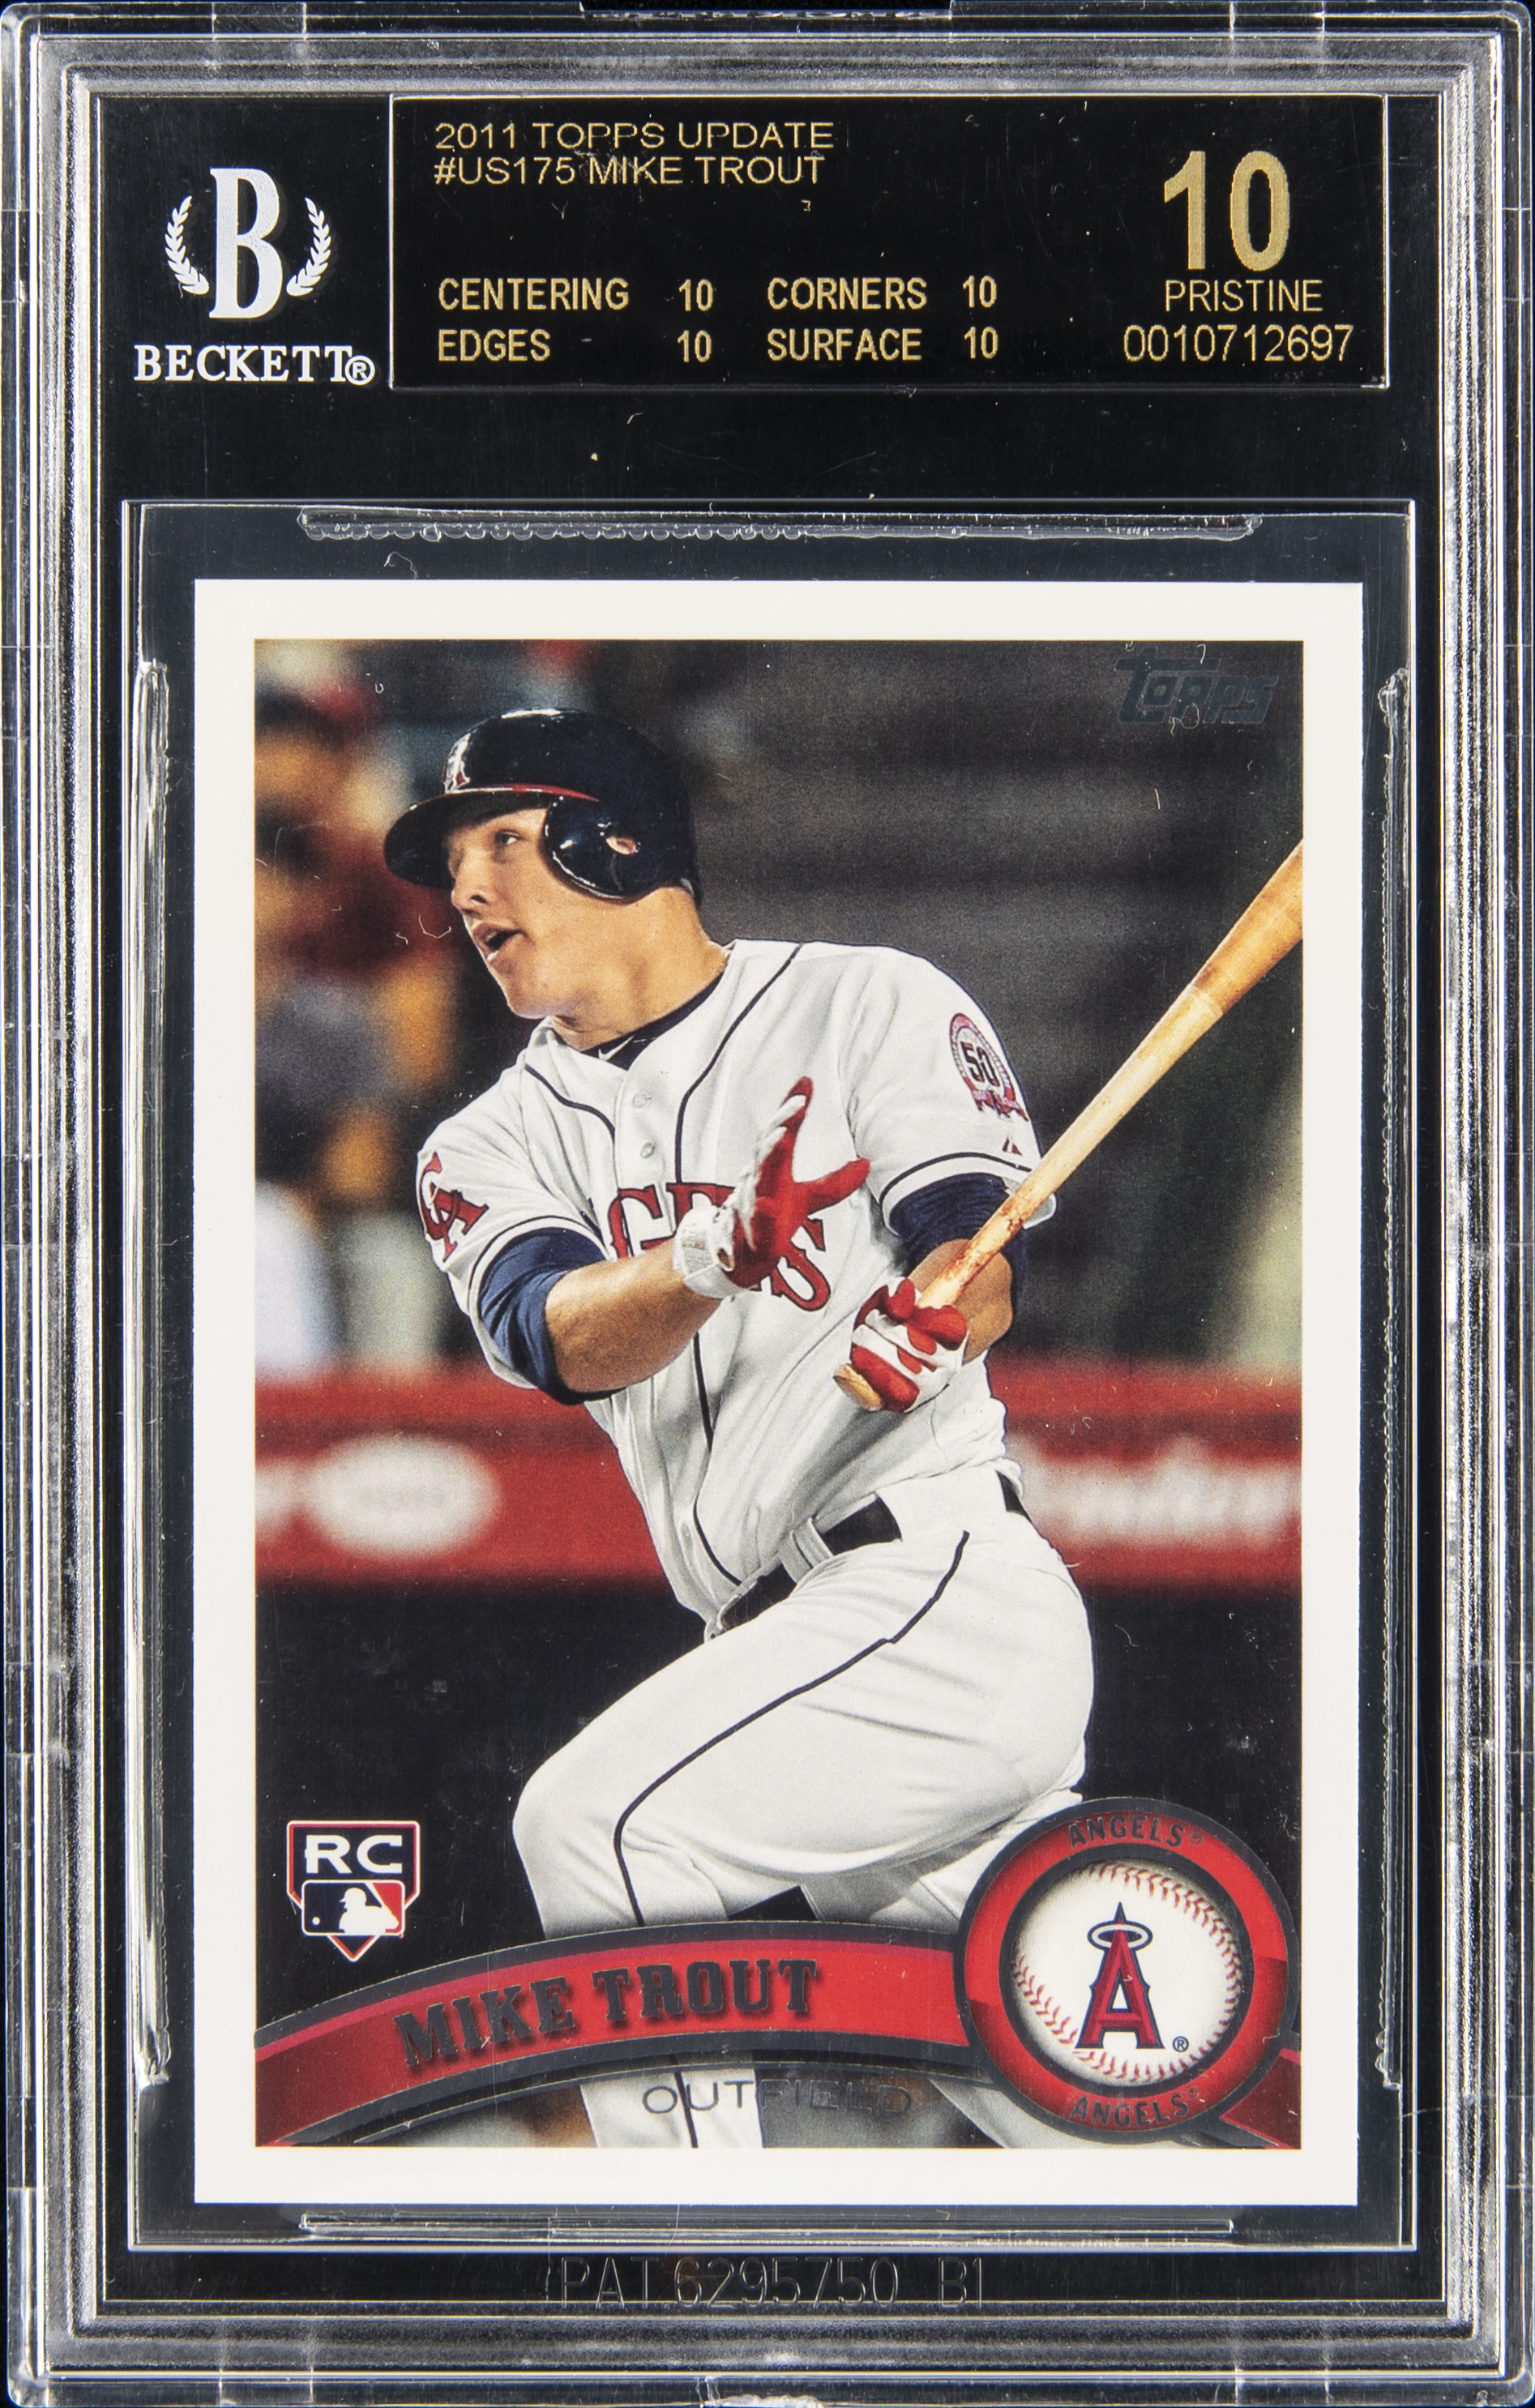 2011 Topps Update #US175 Mike Trout Rookie Card - BGS PRISTINE/Black Label 10